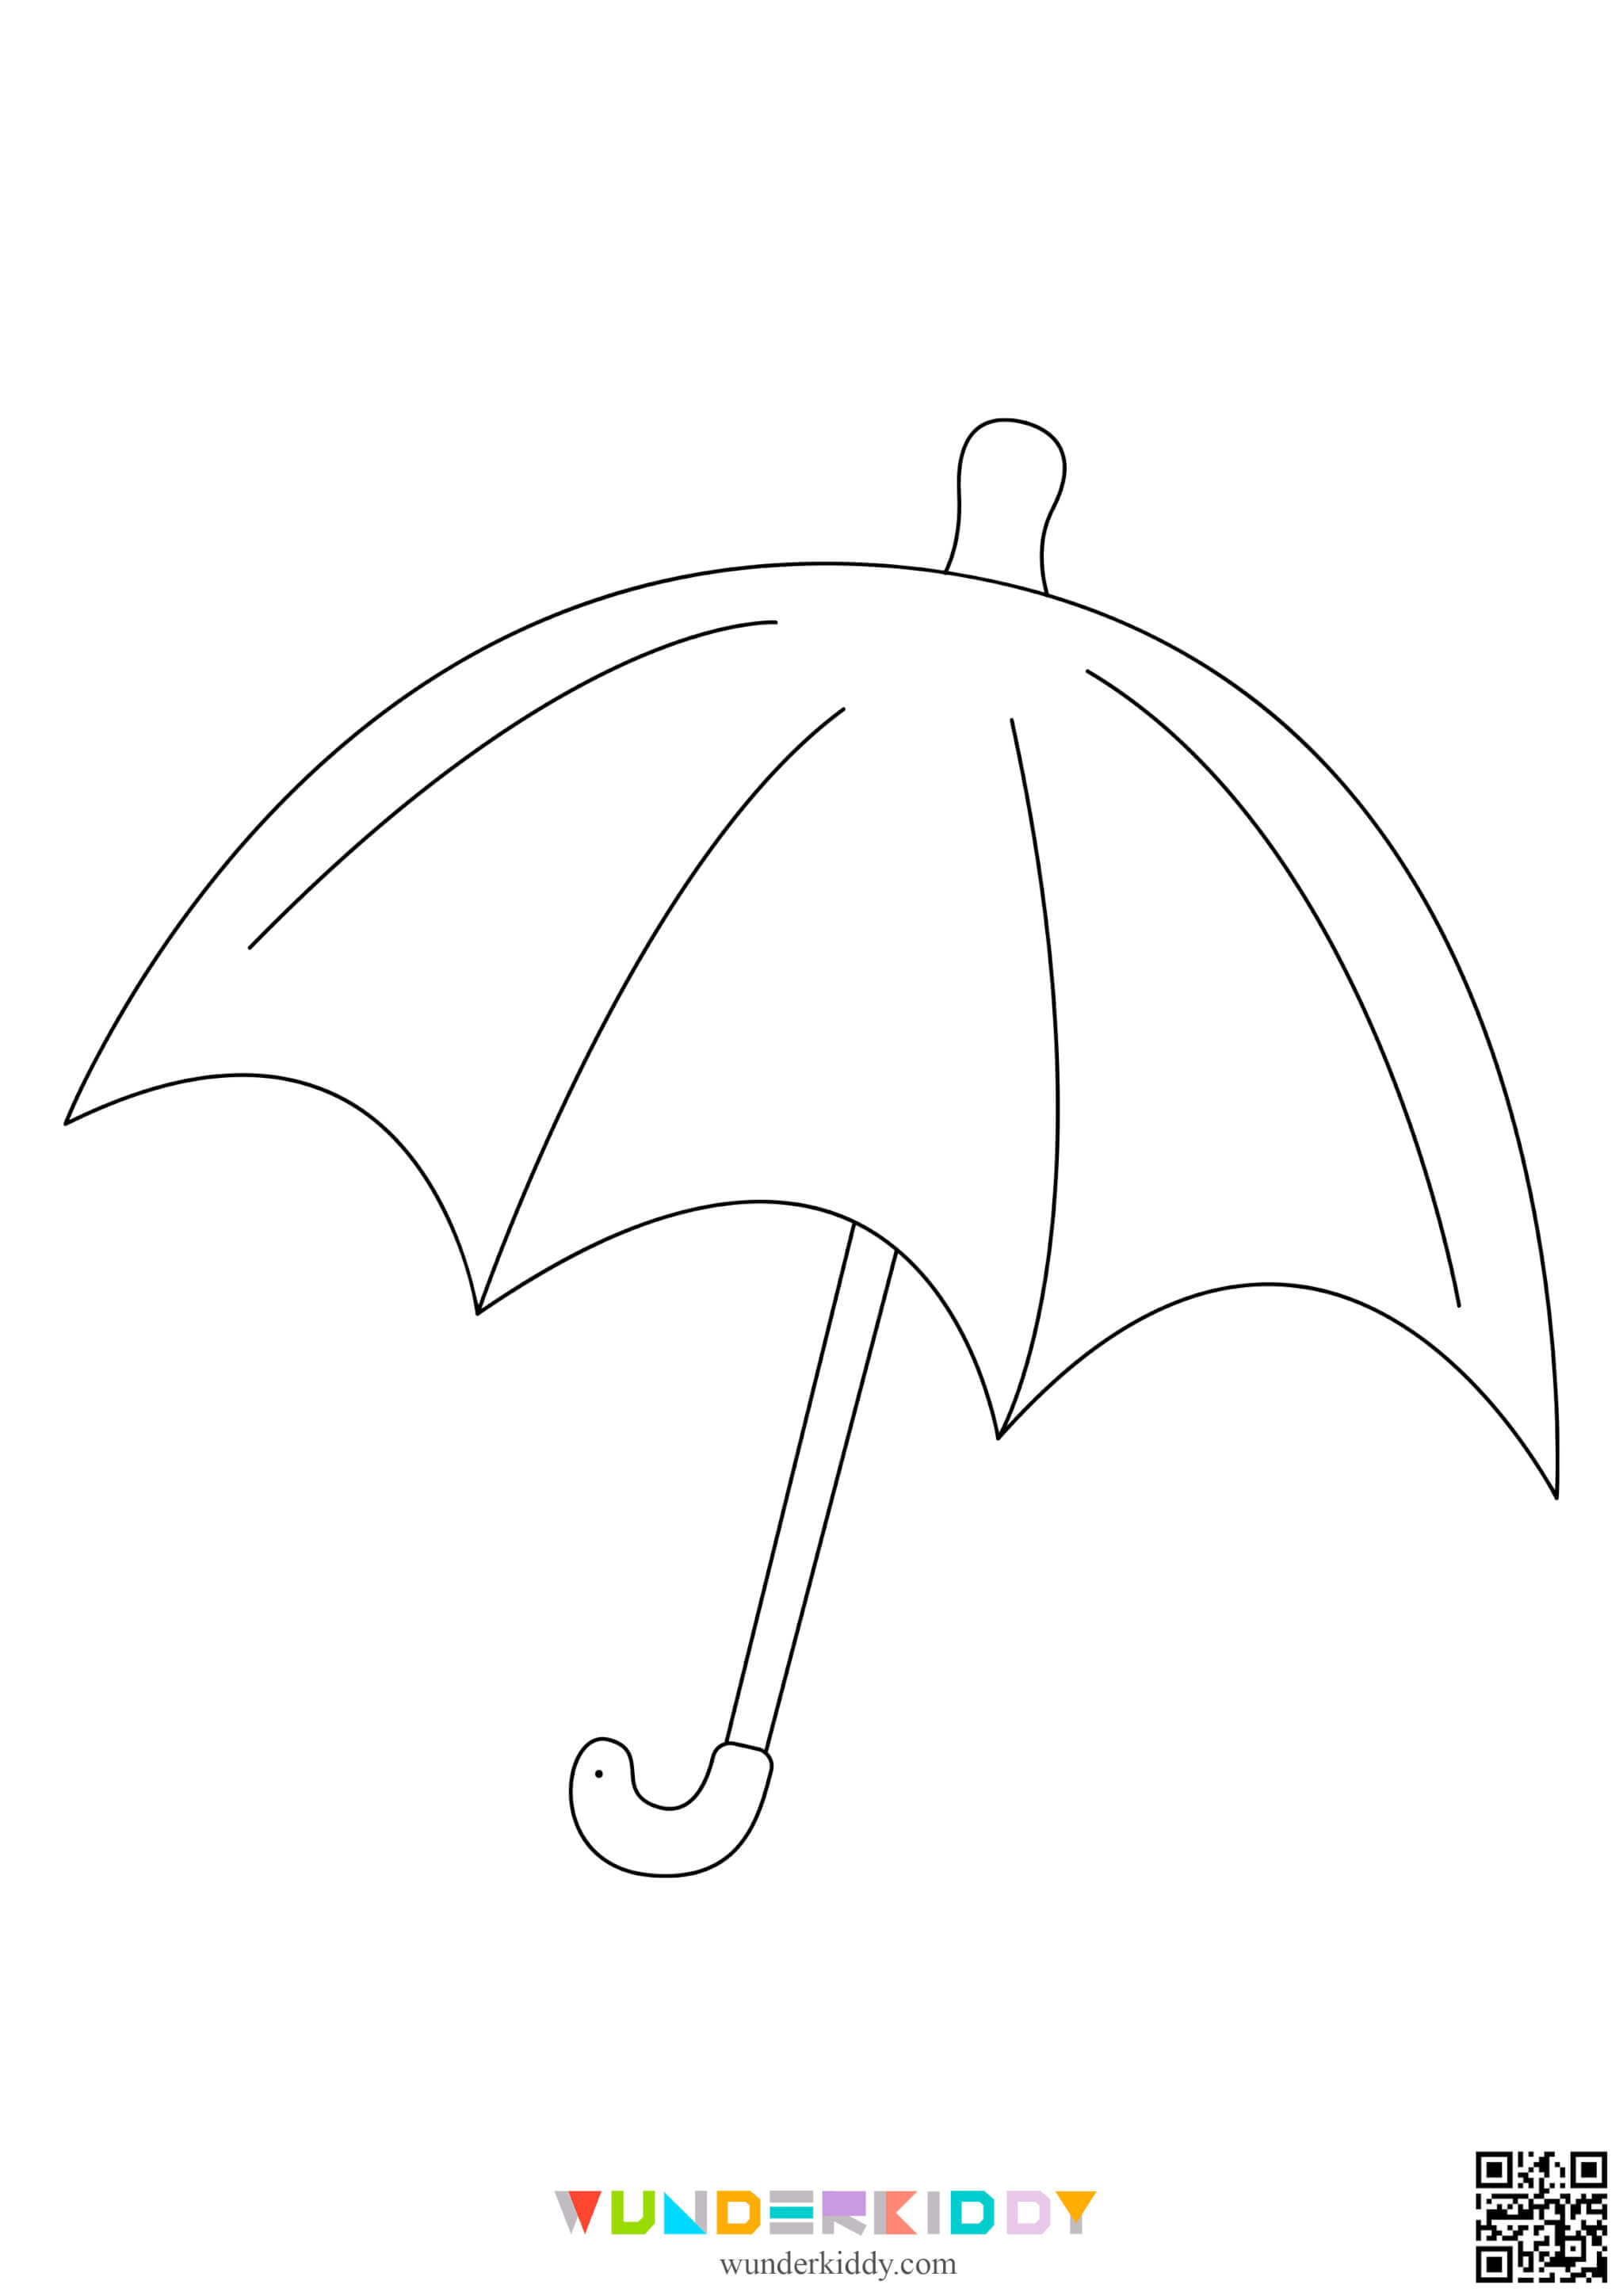 Umbrella Coloring Pages for Kids - Image 8